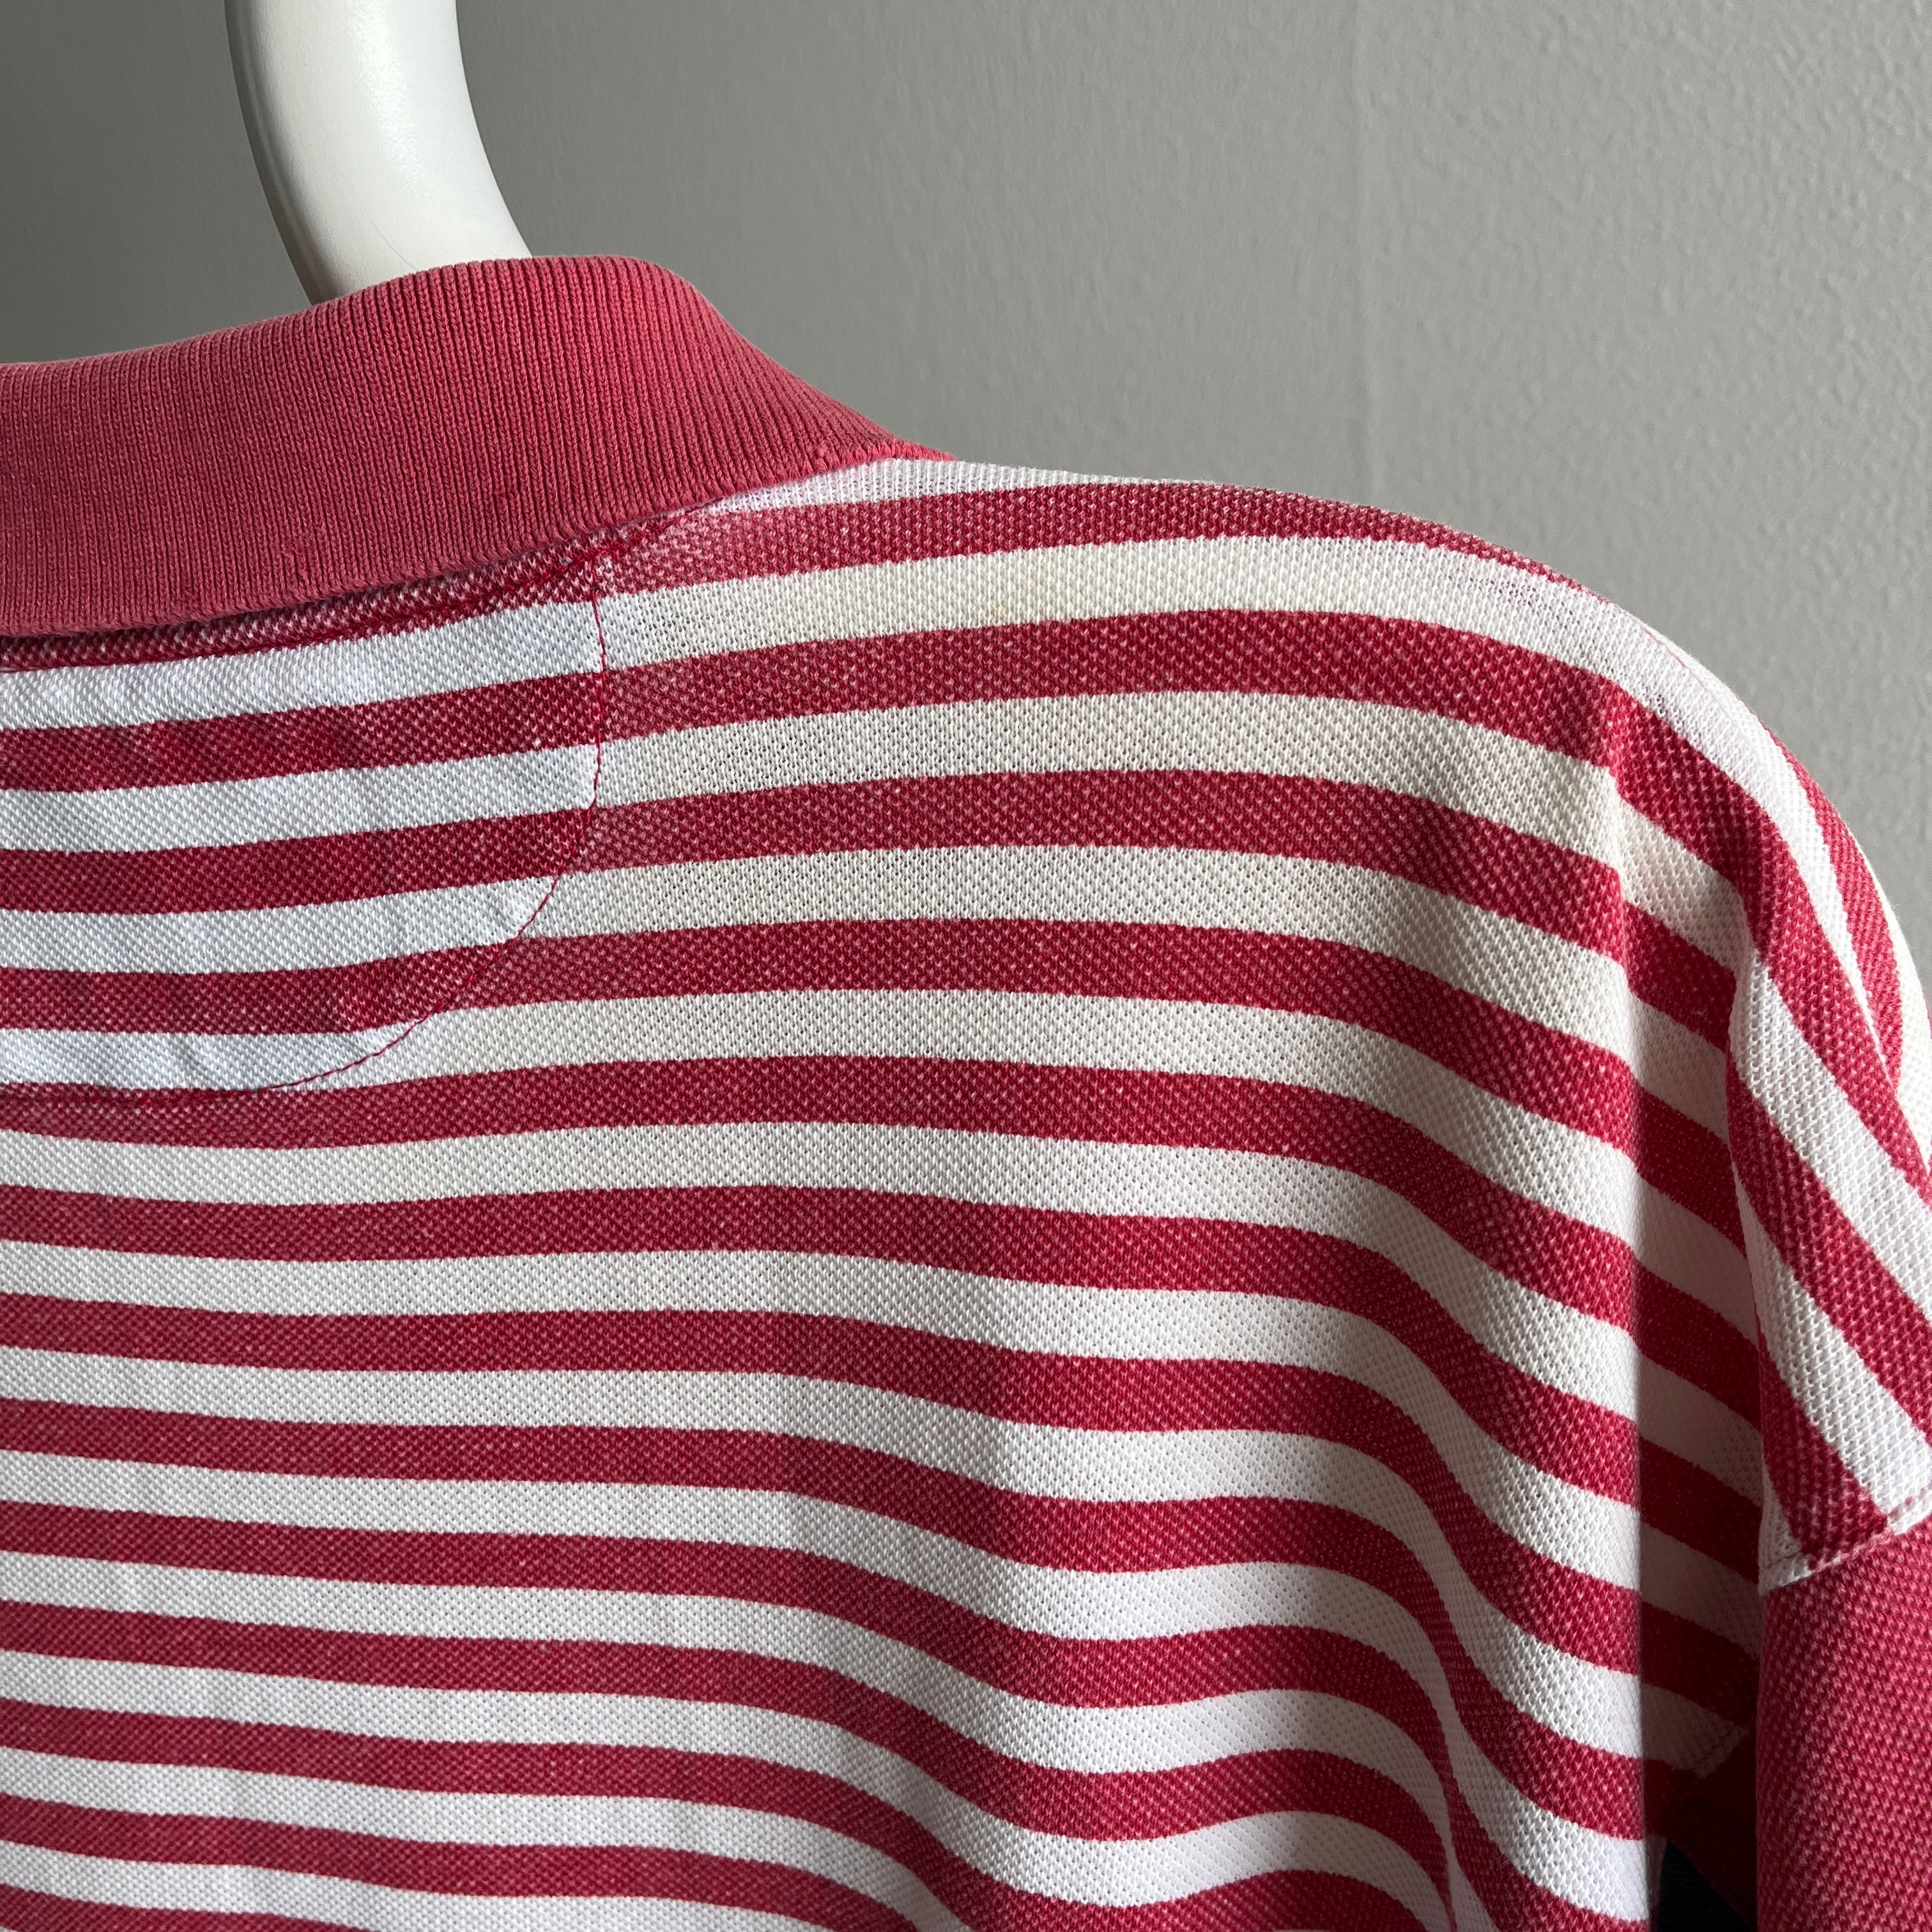 1990/2000s Striped Color Block Faded and Worn Cotton Polo Shirt